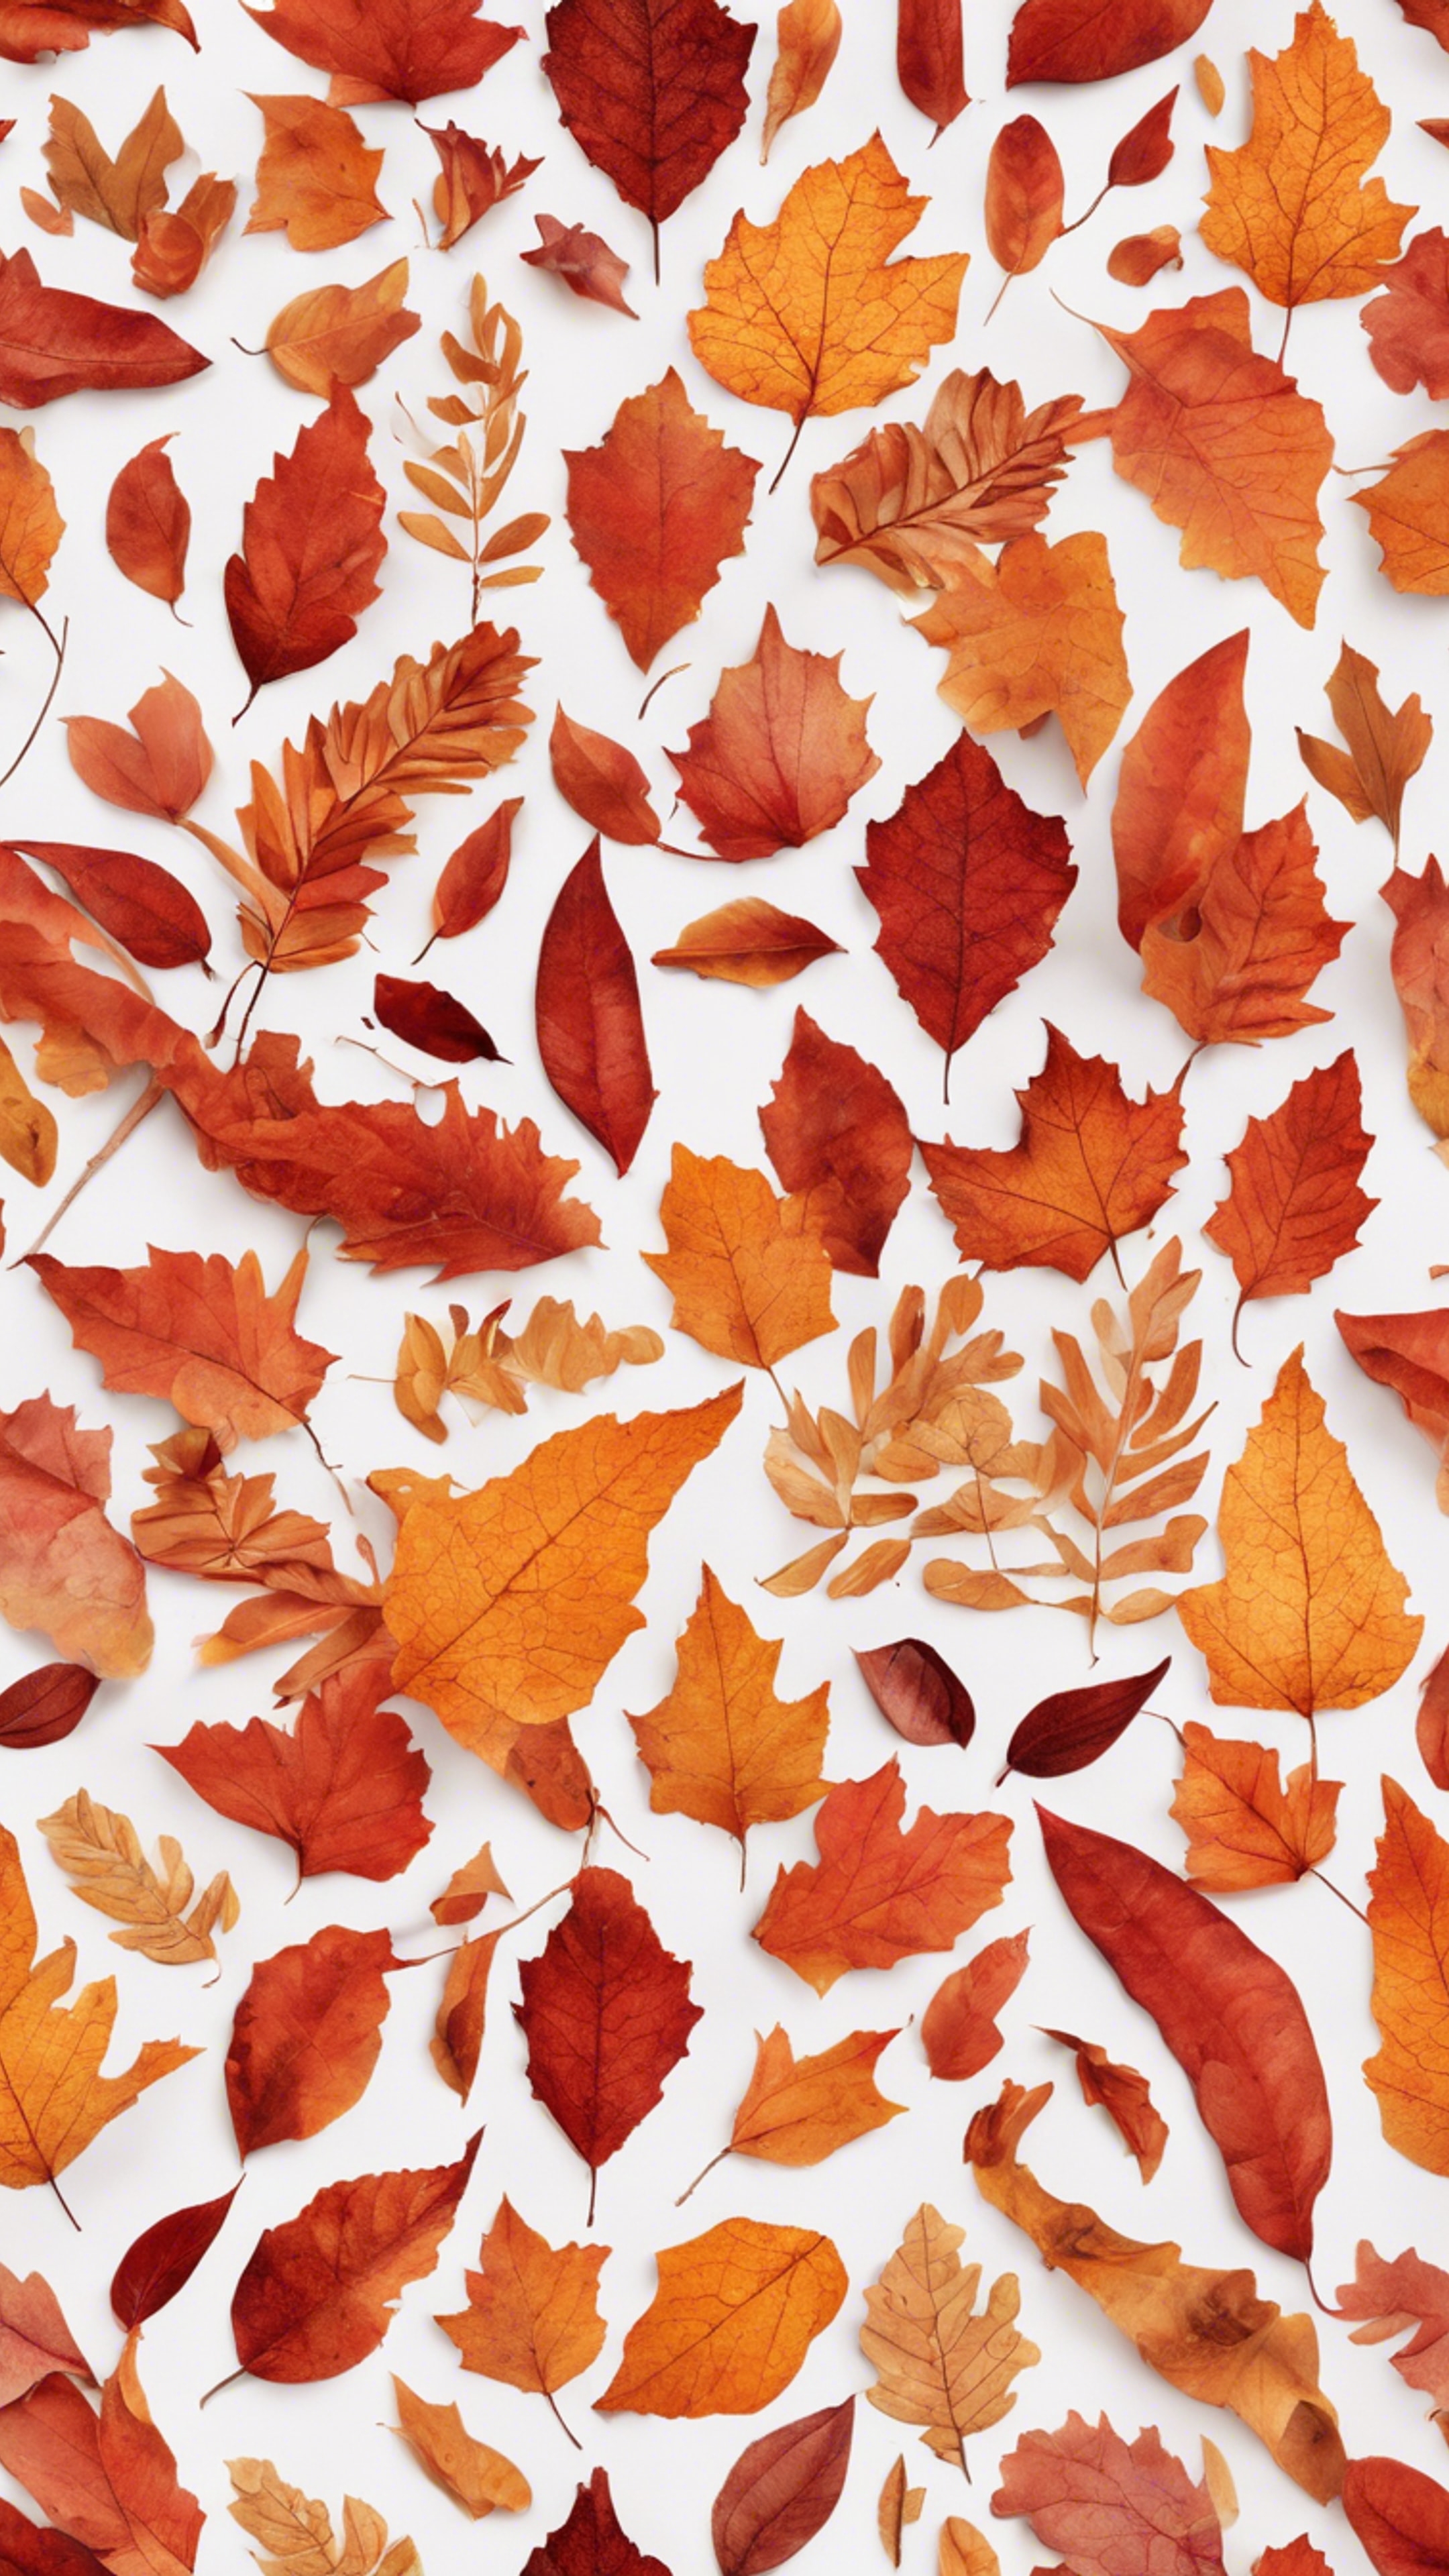 A fiery autumn pattern, reminiscent of falling leaves, in a seamless mix of red and orange. Валлпапер[40781a28d8554bd2886e]